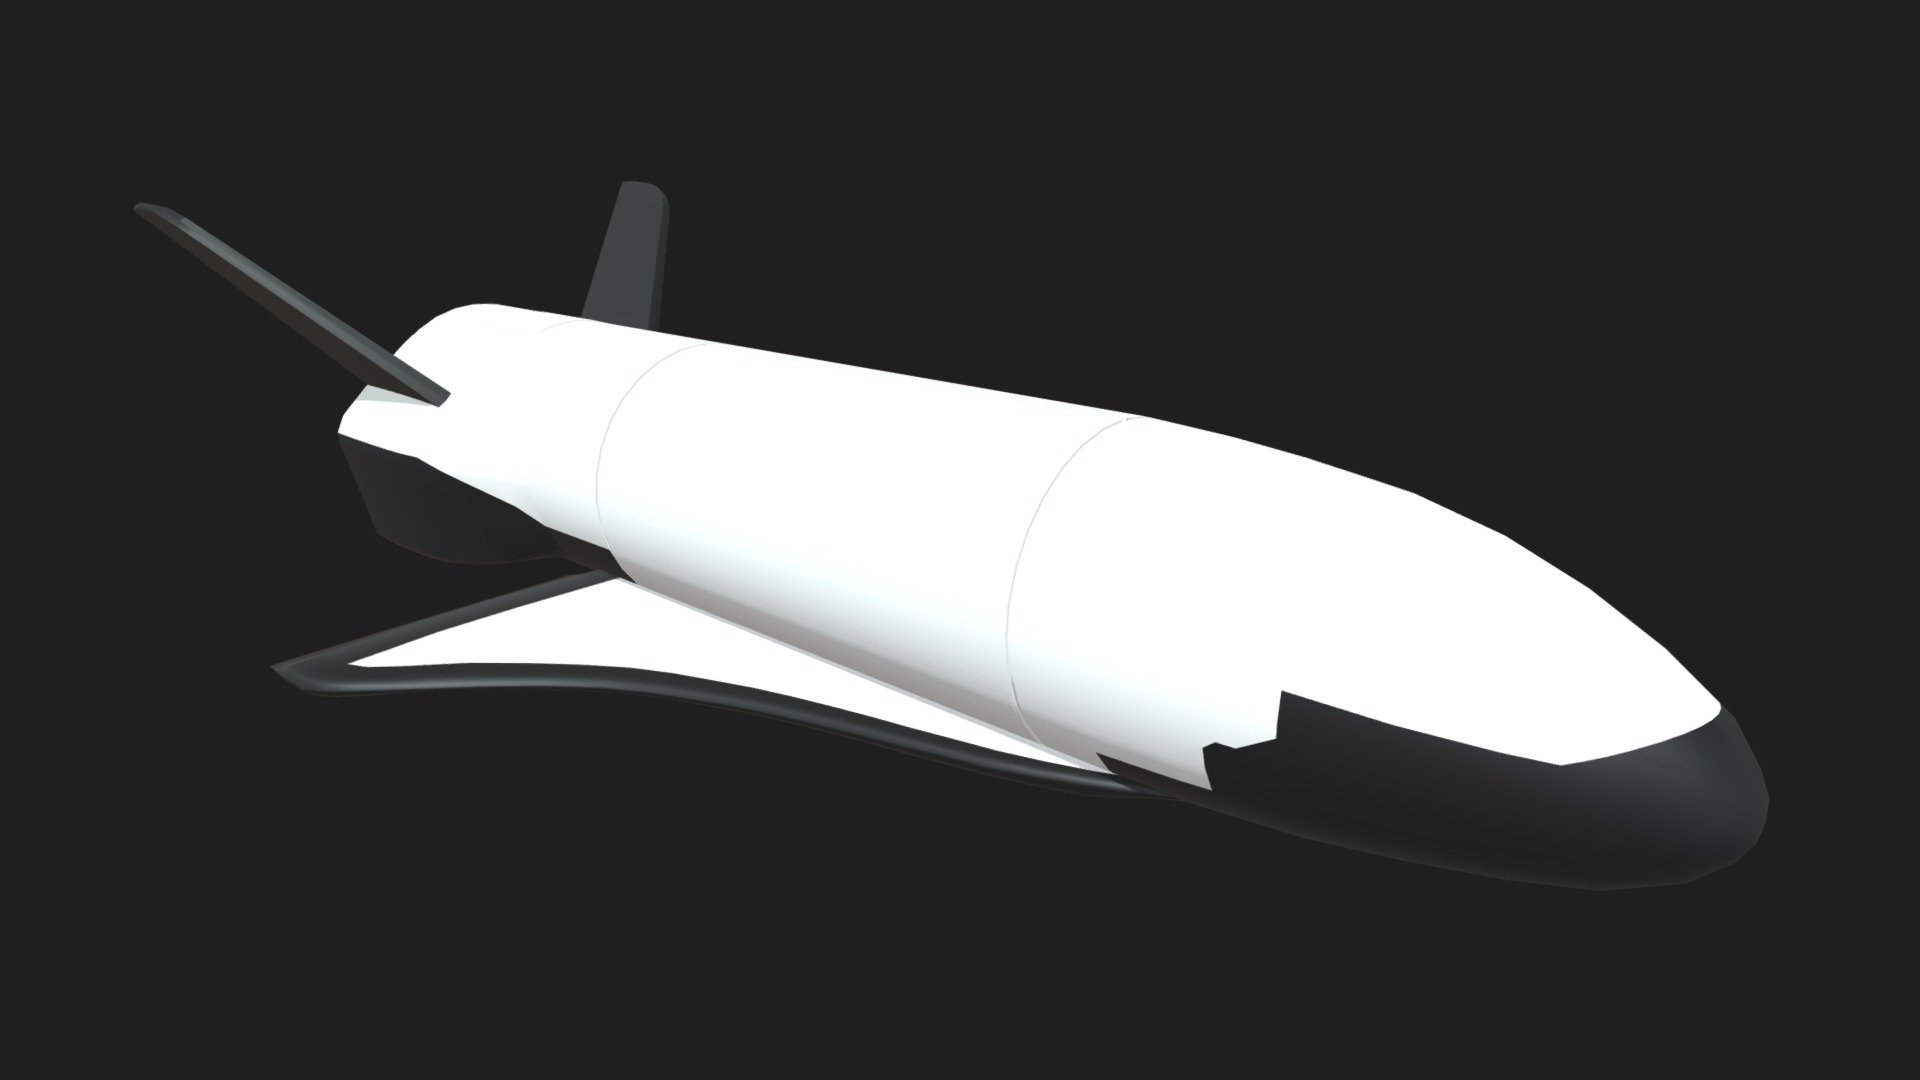 The model is made on a scale of 1:1, all dimensions are met.
Originally created with Blender 3.3.10.
The model is based on the dimensions and materials that I found on the official Boeing website, as well as other sites and forums 3d model